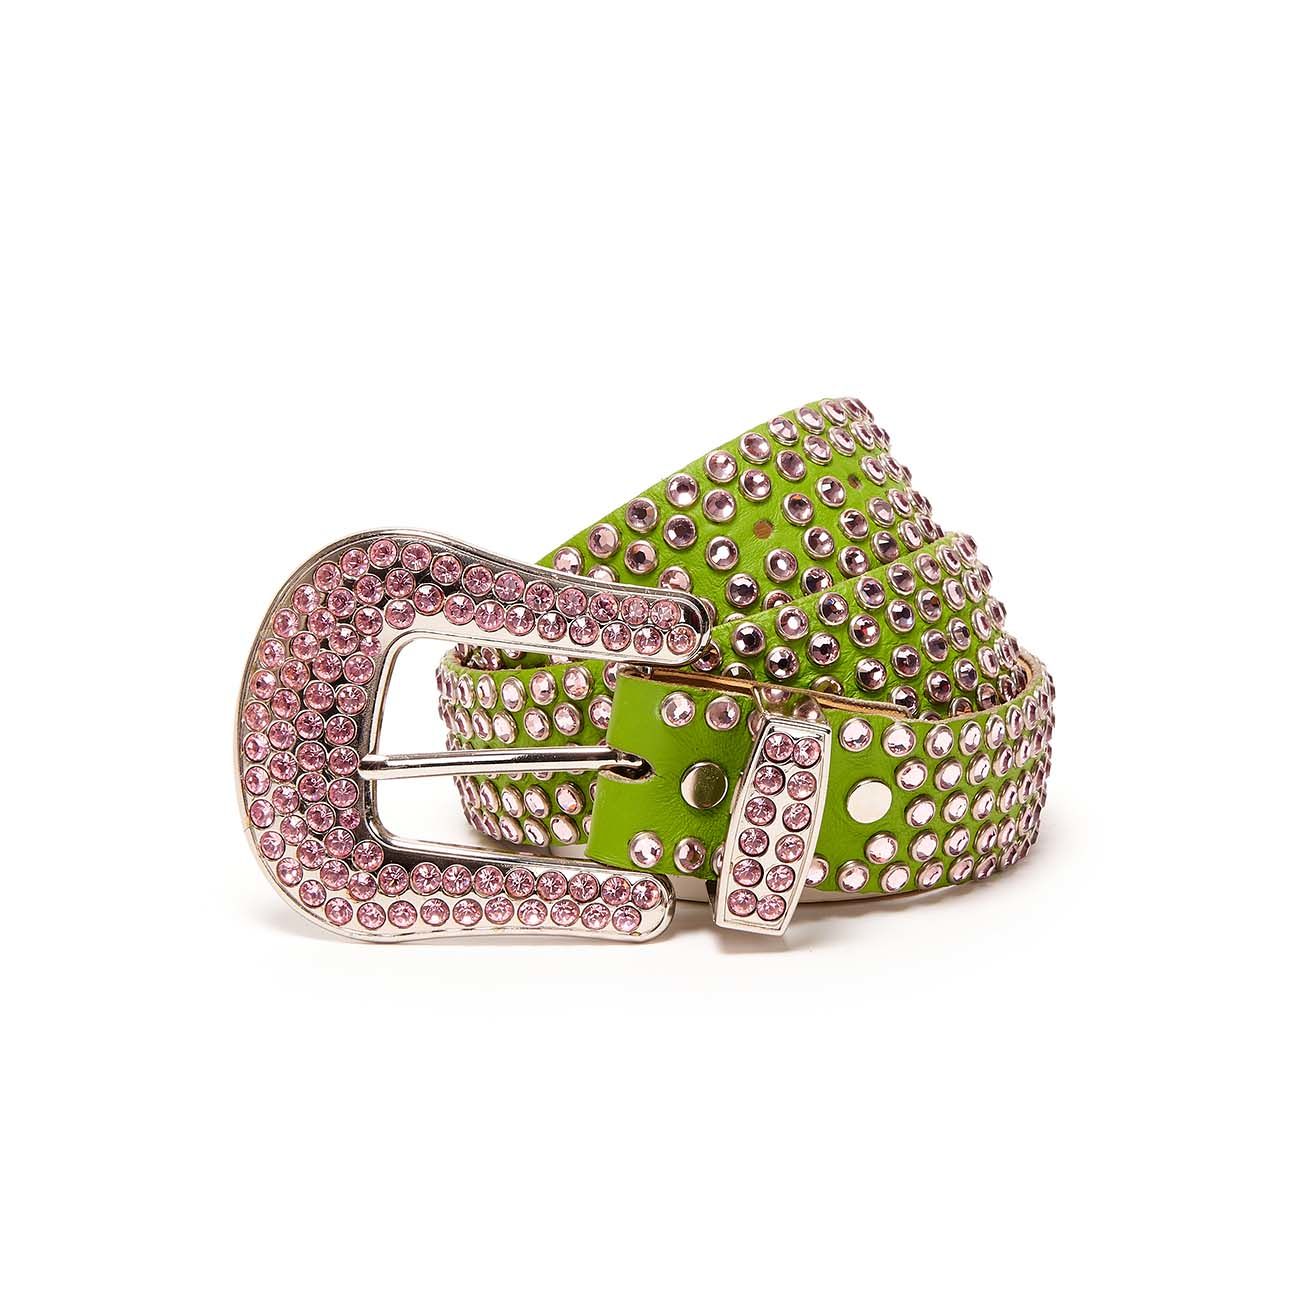 HIGH BELT BIG BUCKLE WITH SWAROVSKY Woman Green Pink 2118906259946